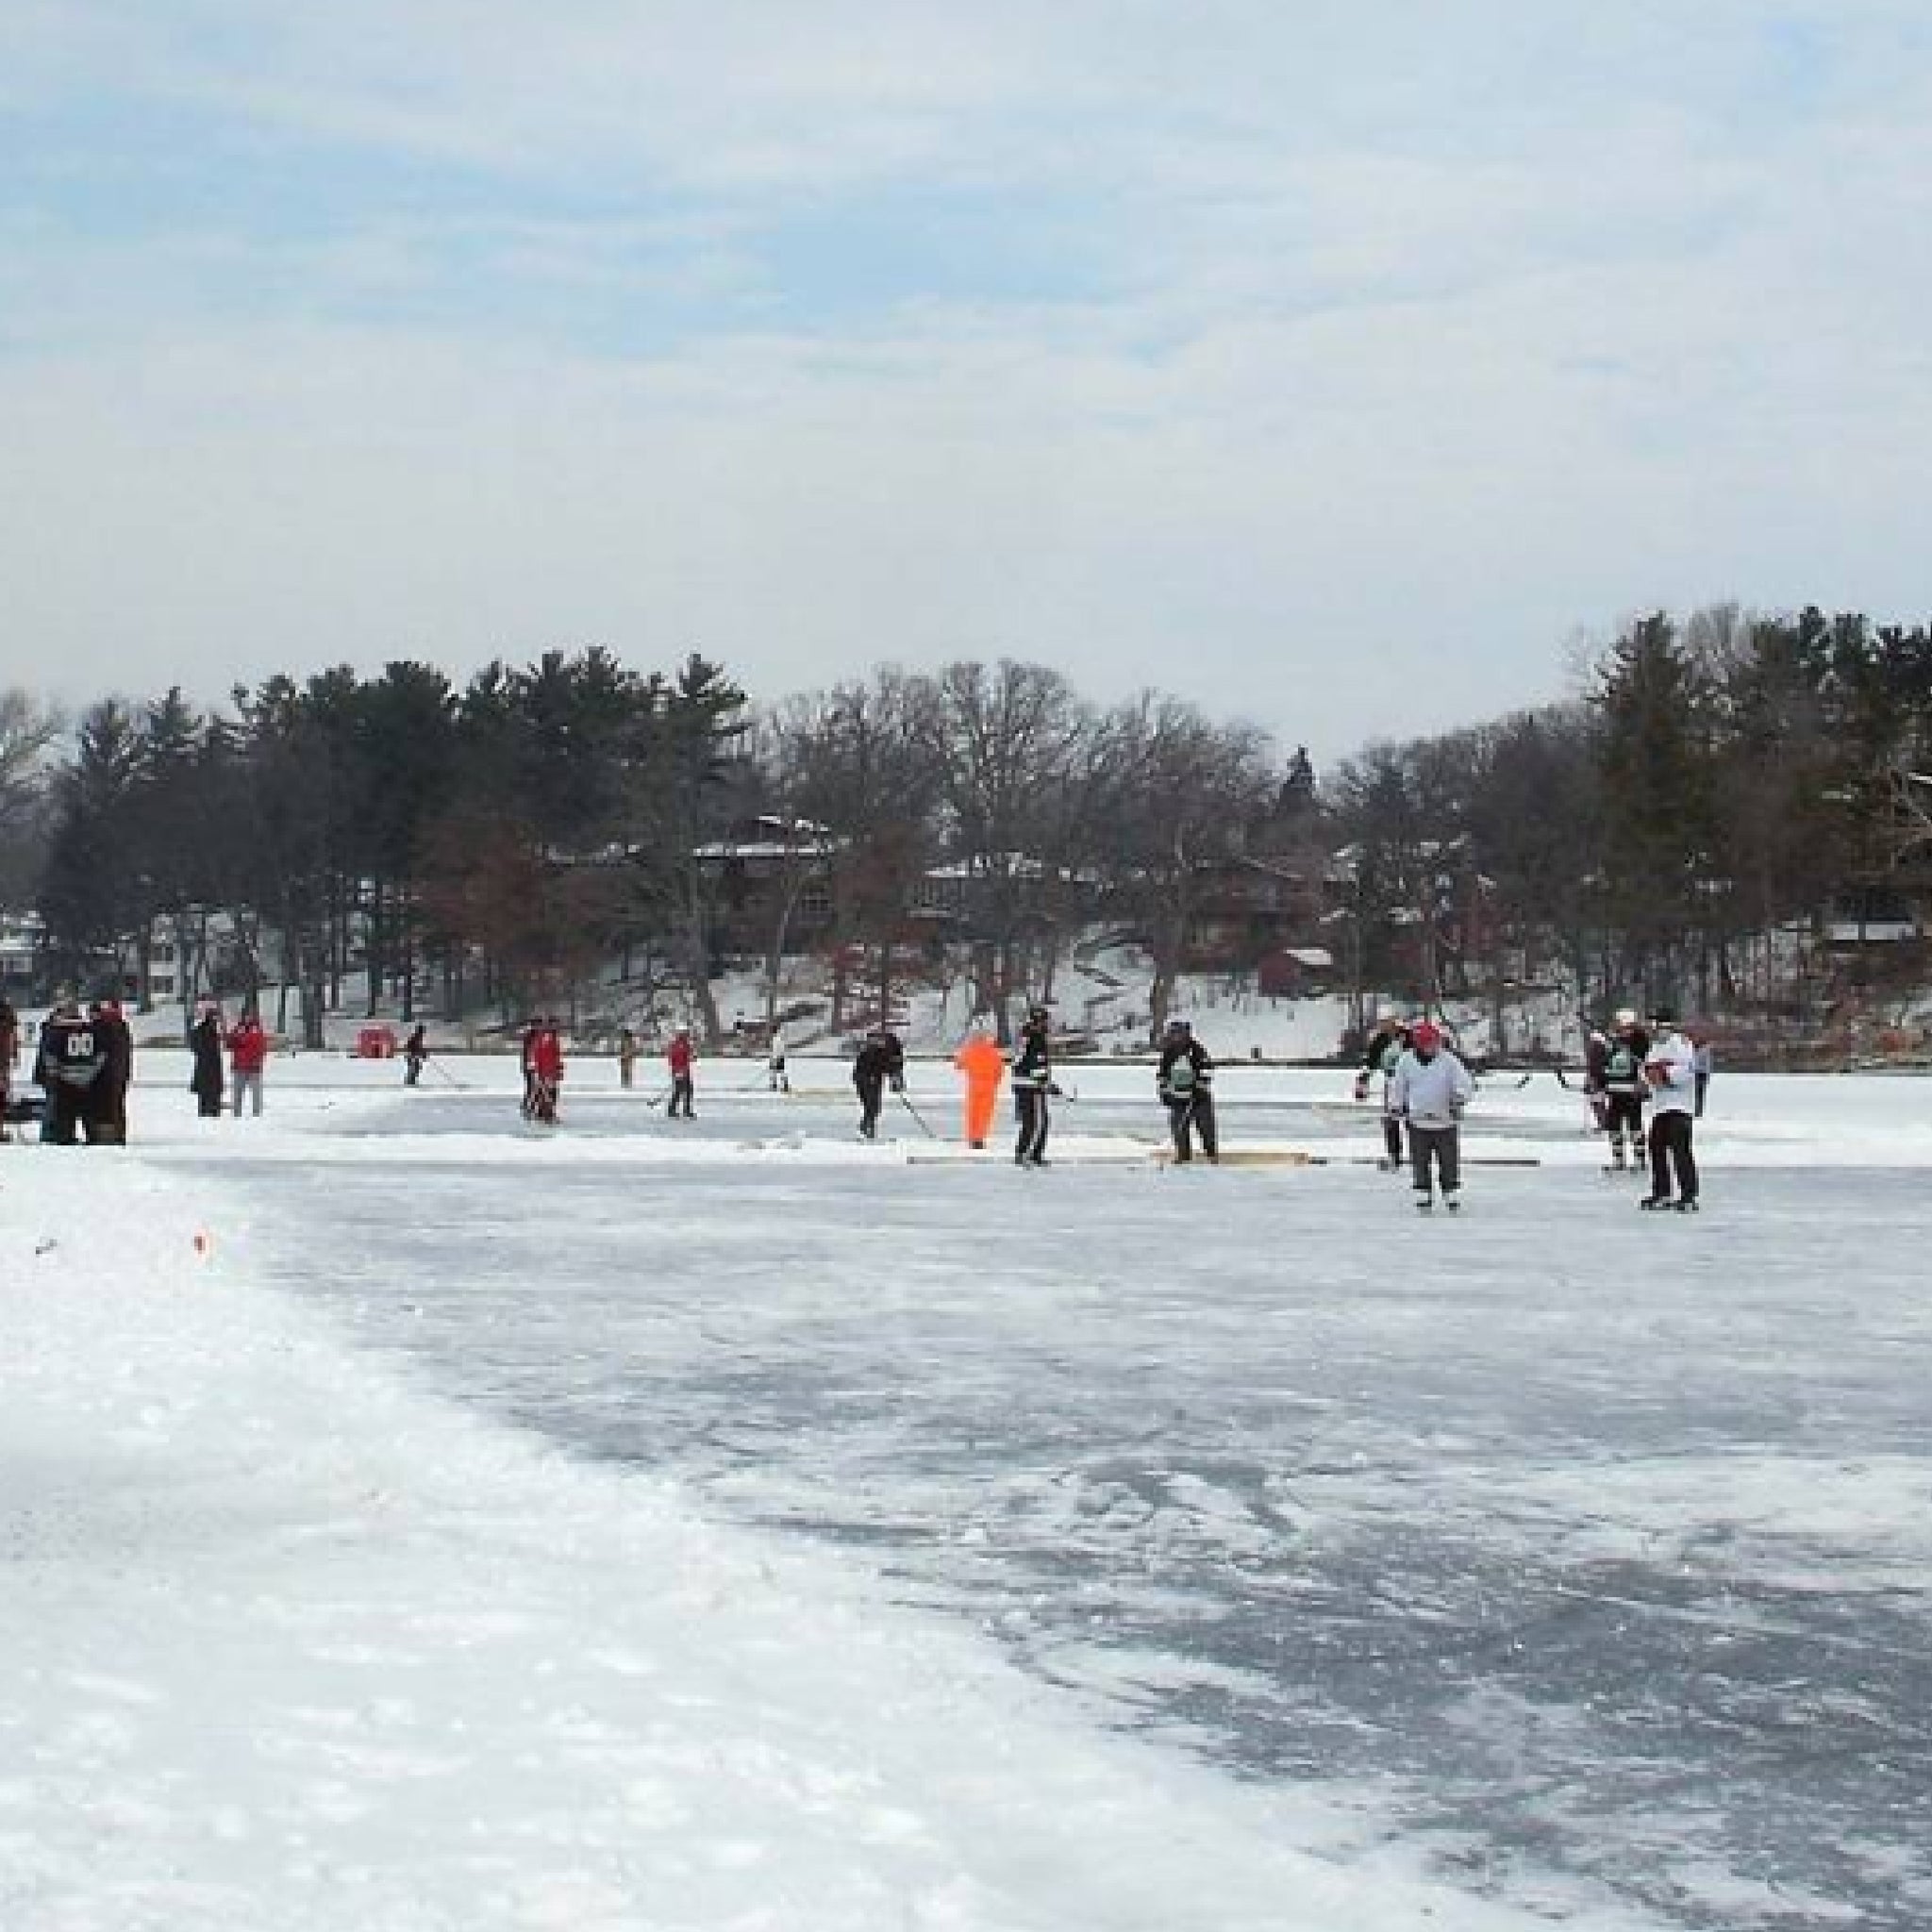 Image from the Lake in the Hills Pond Hockey Classic.